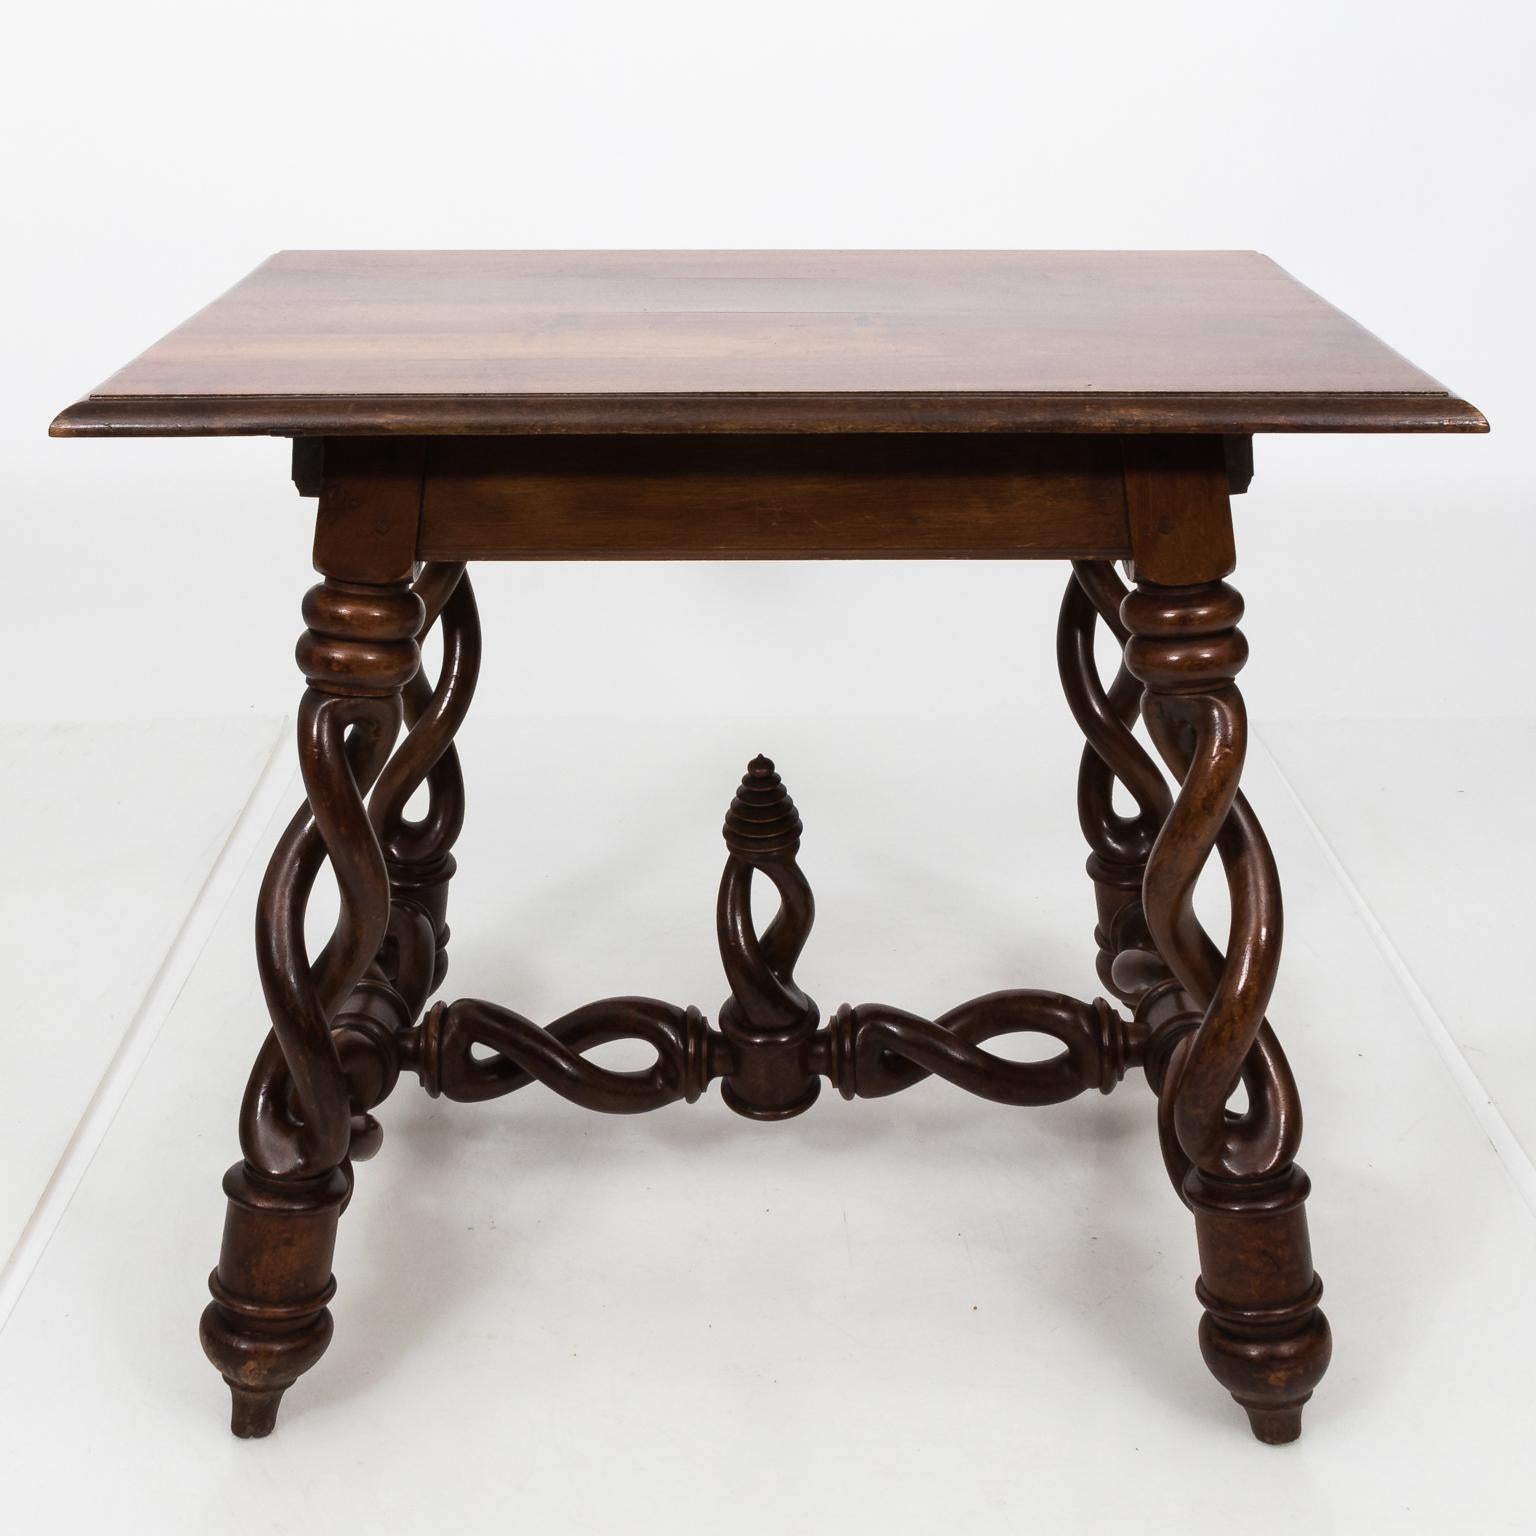 19th century Continental style loose barley twist table with centre pointed finial.
 